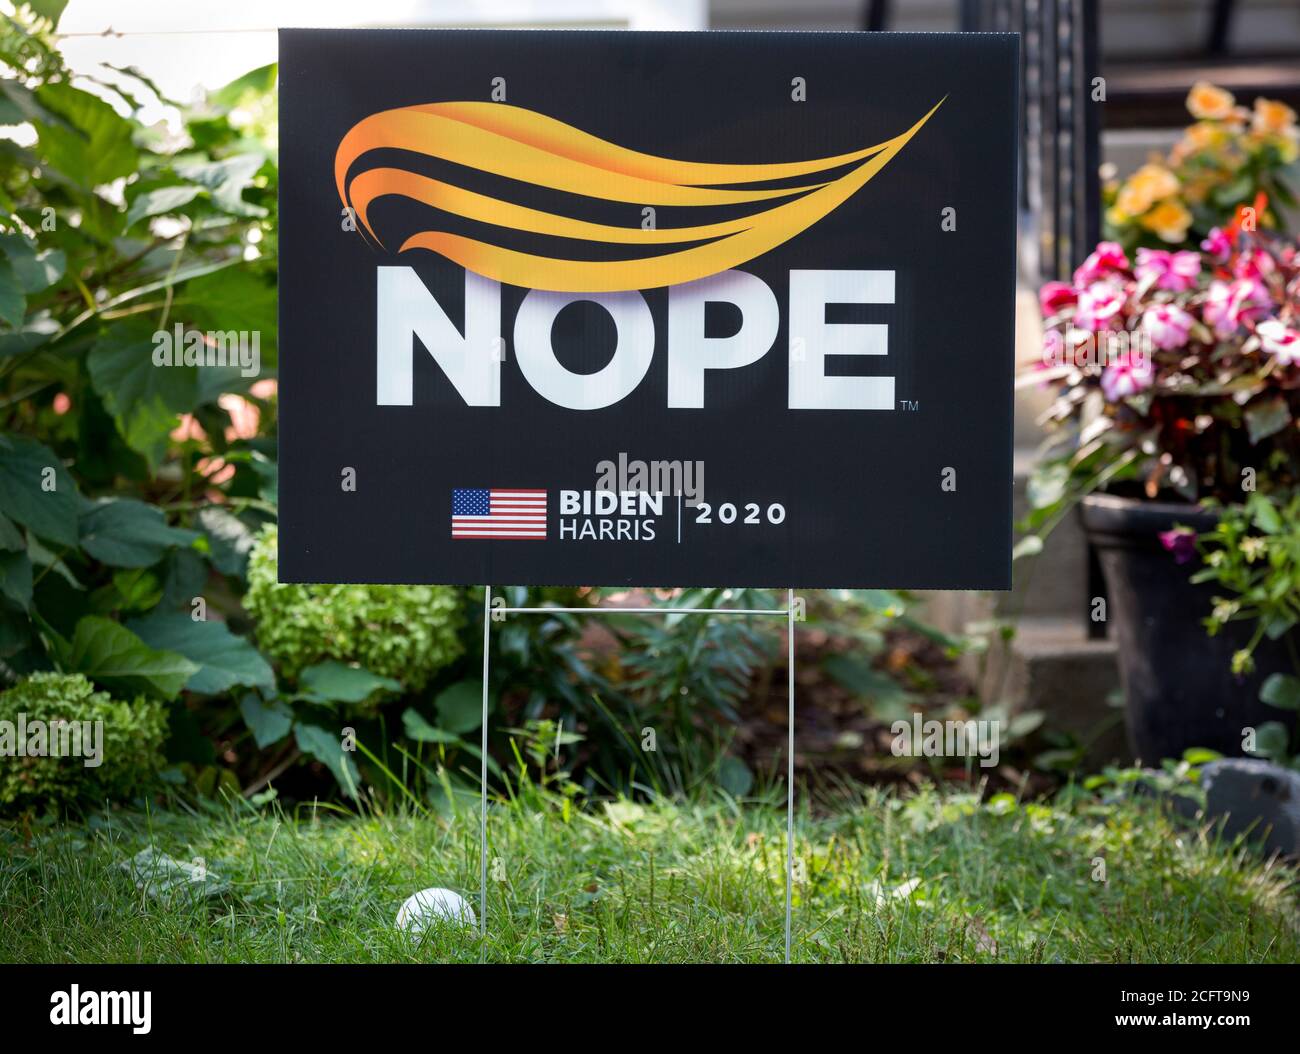 A 2020 Joe Biden and Kamala Harris anti-Donald Trump presidential yard sign with a design of an orange hair style and the word Nope. Stock Photo